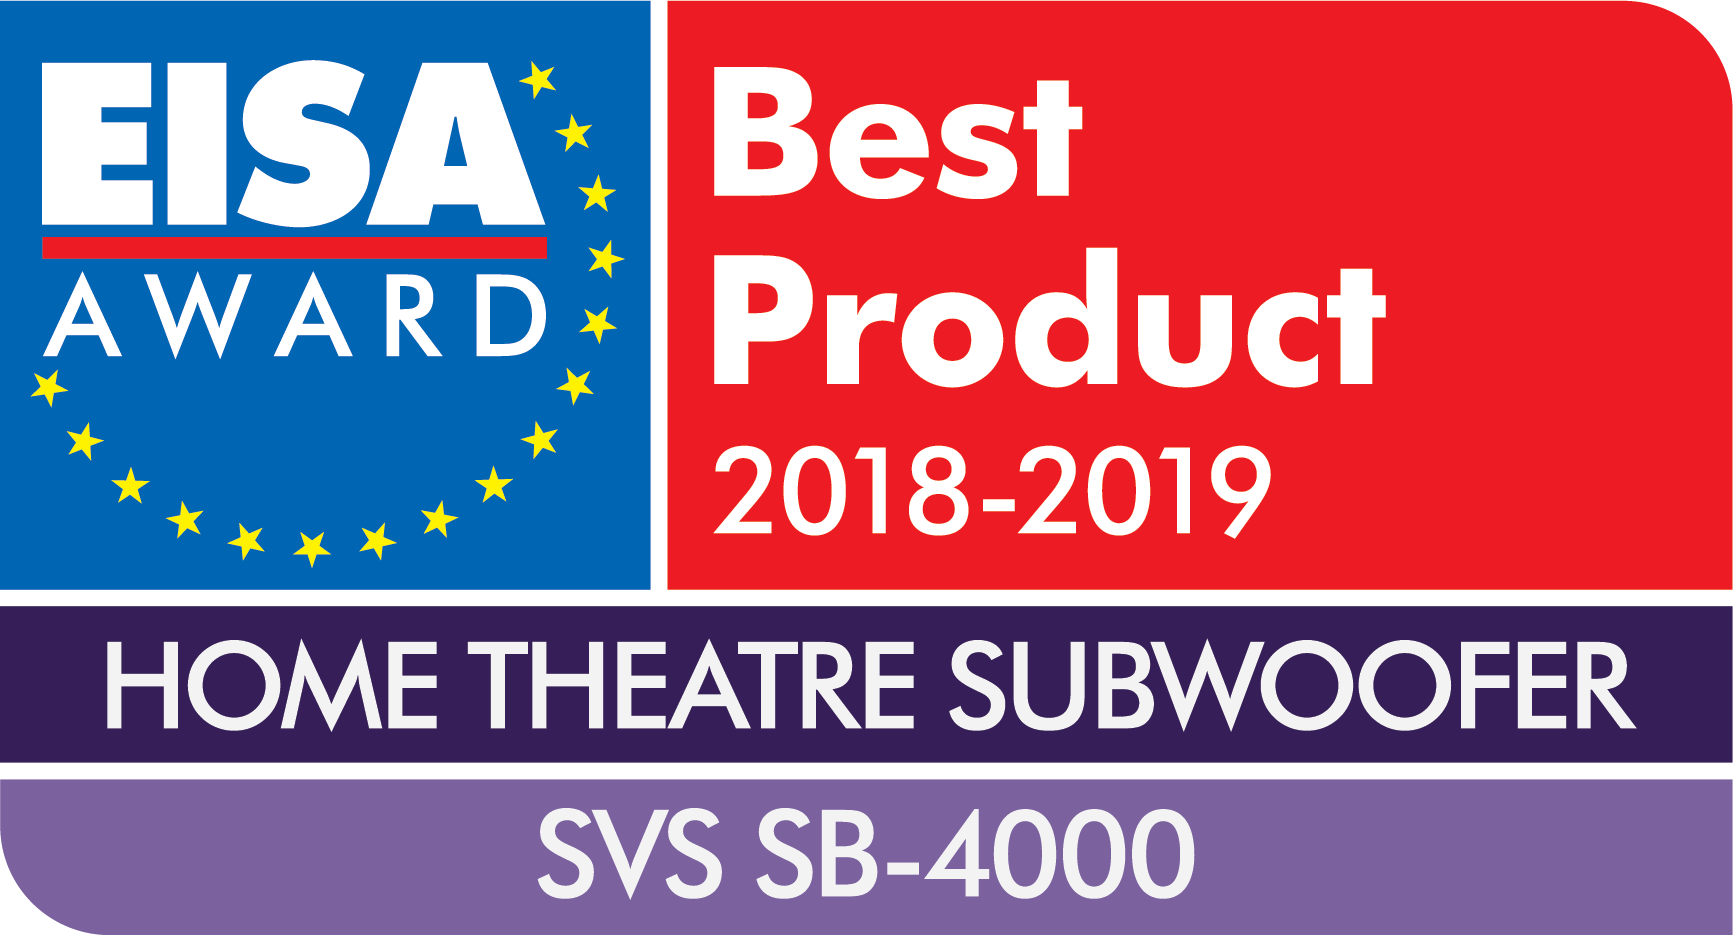 EISA Award - Best Product 2018-2019 - Home Theater Subwoofer